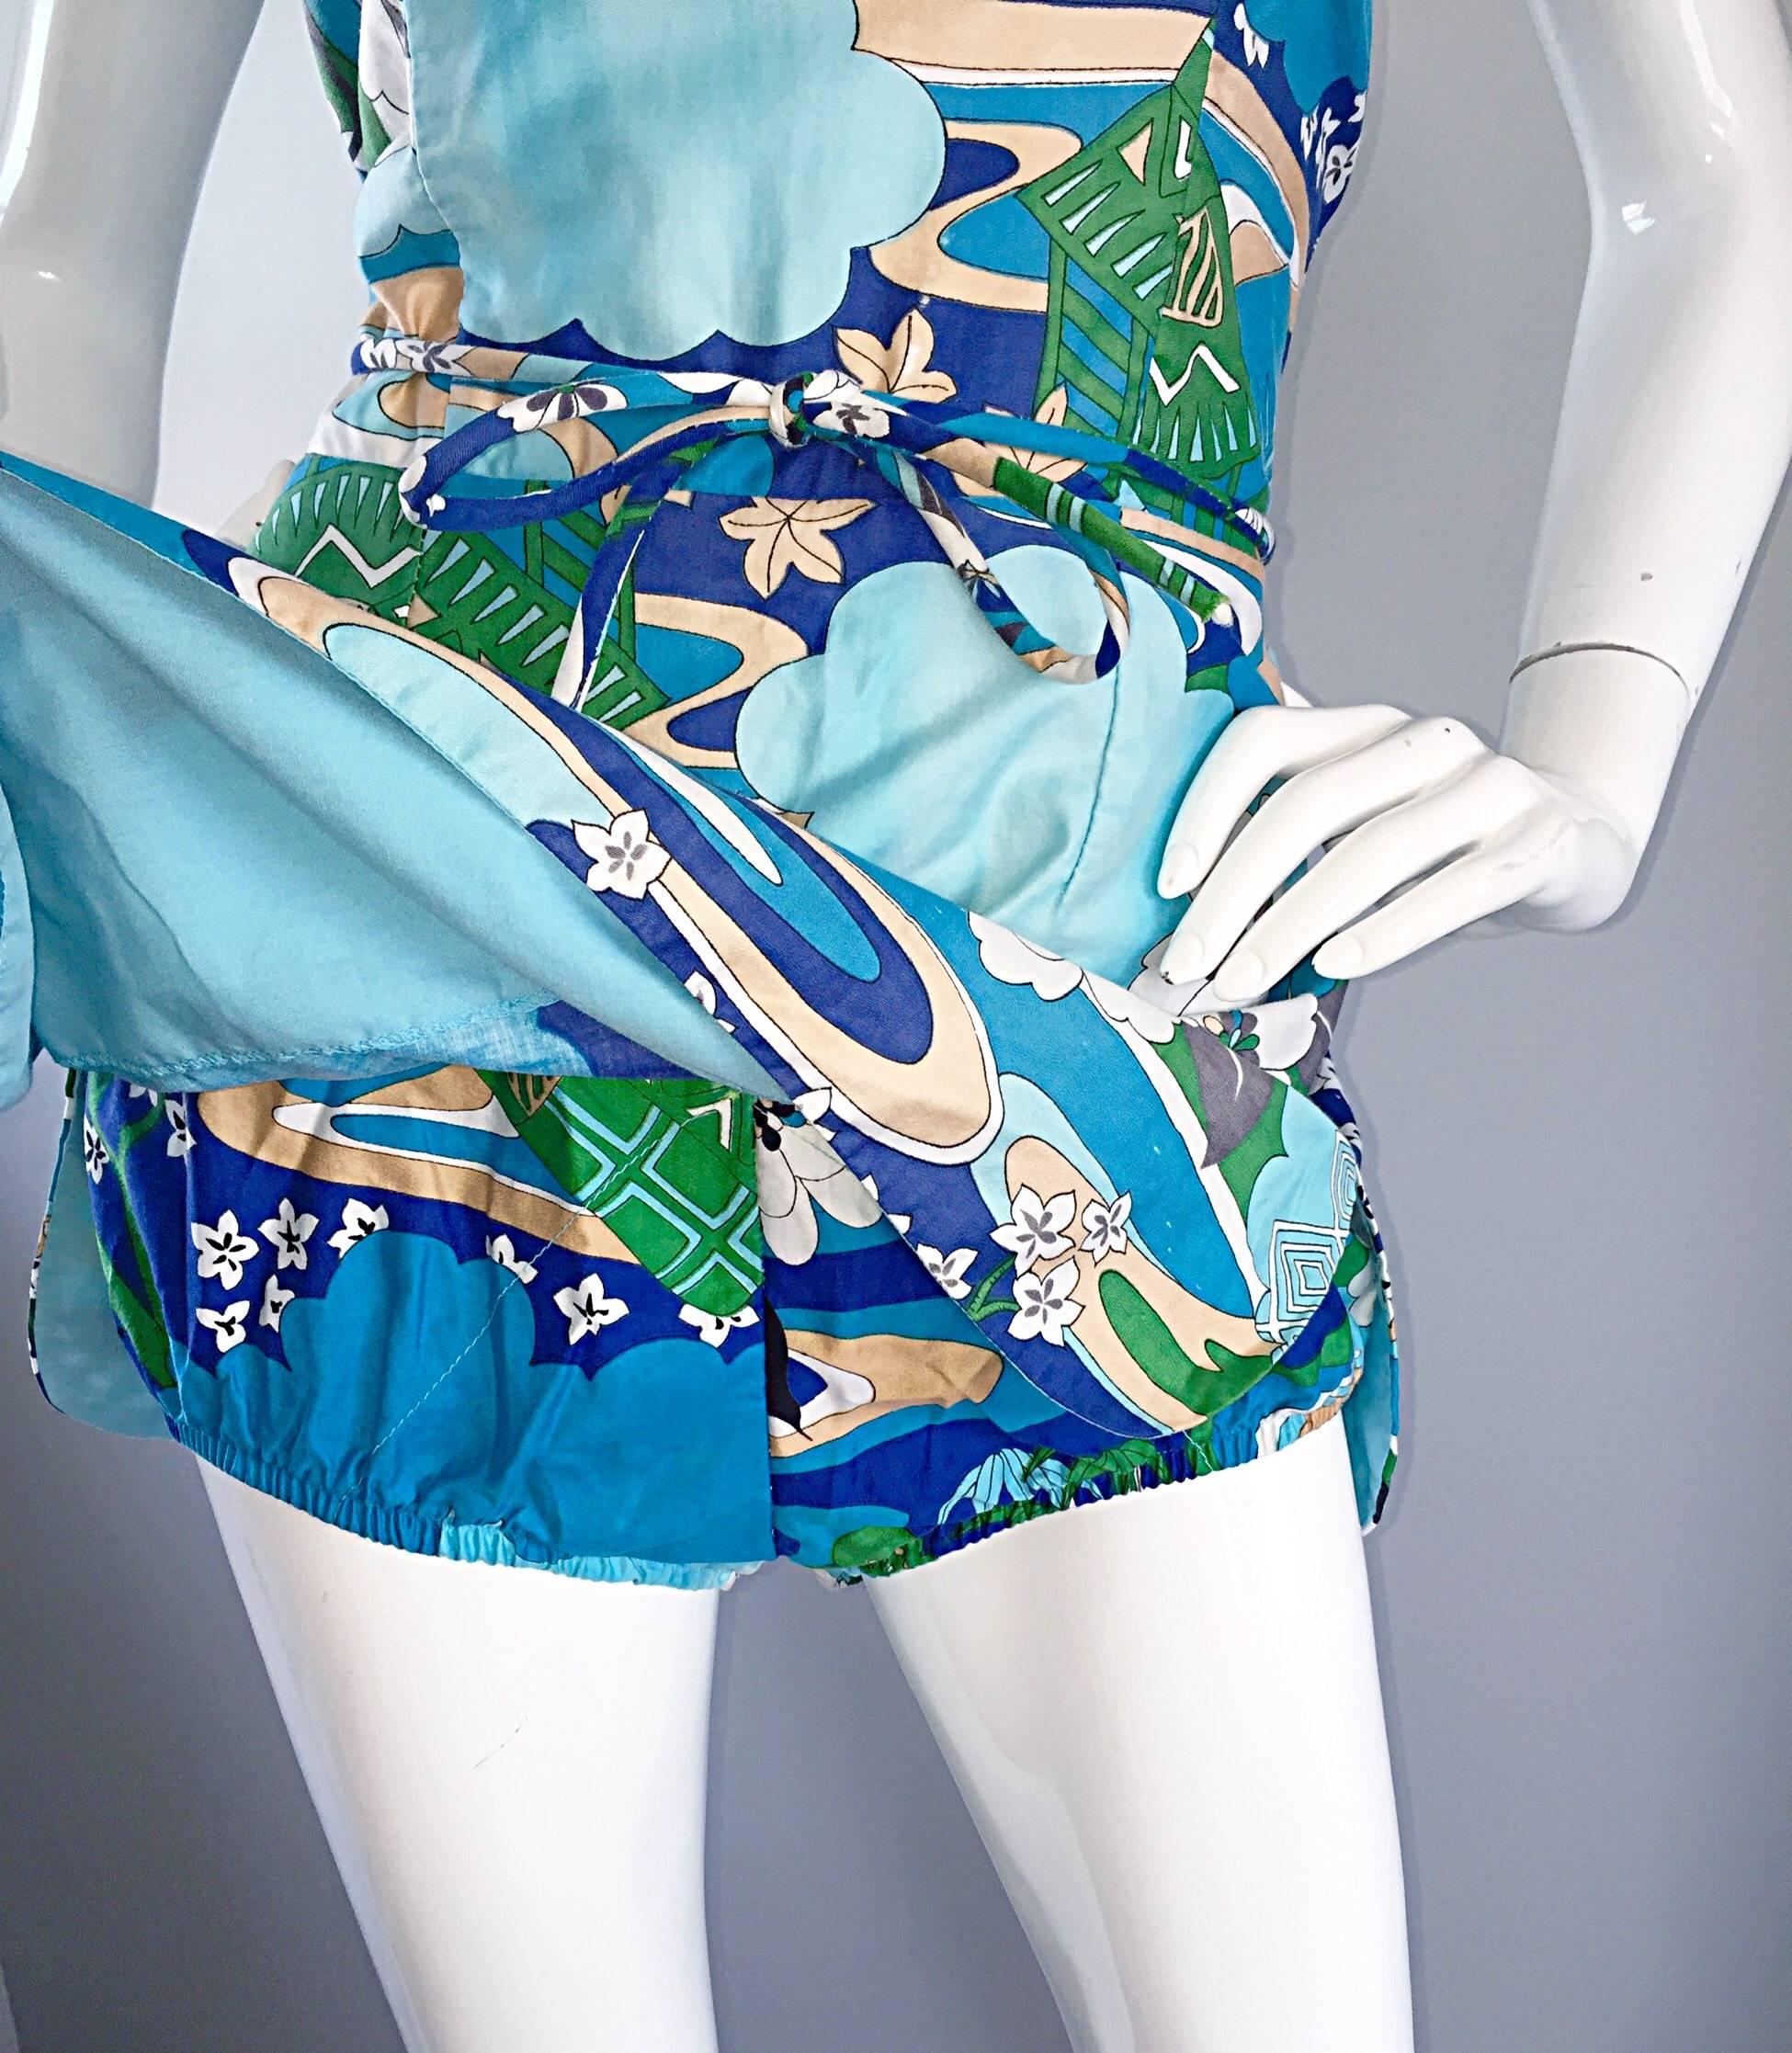 Blue 1960s Romper Swimsuit Onesie w/ Chineese Themed Print By Roxanne Perfection Fit